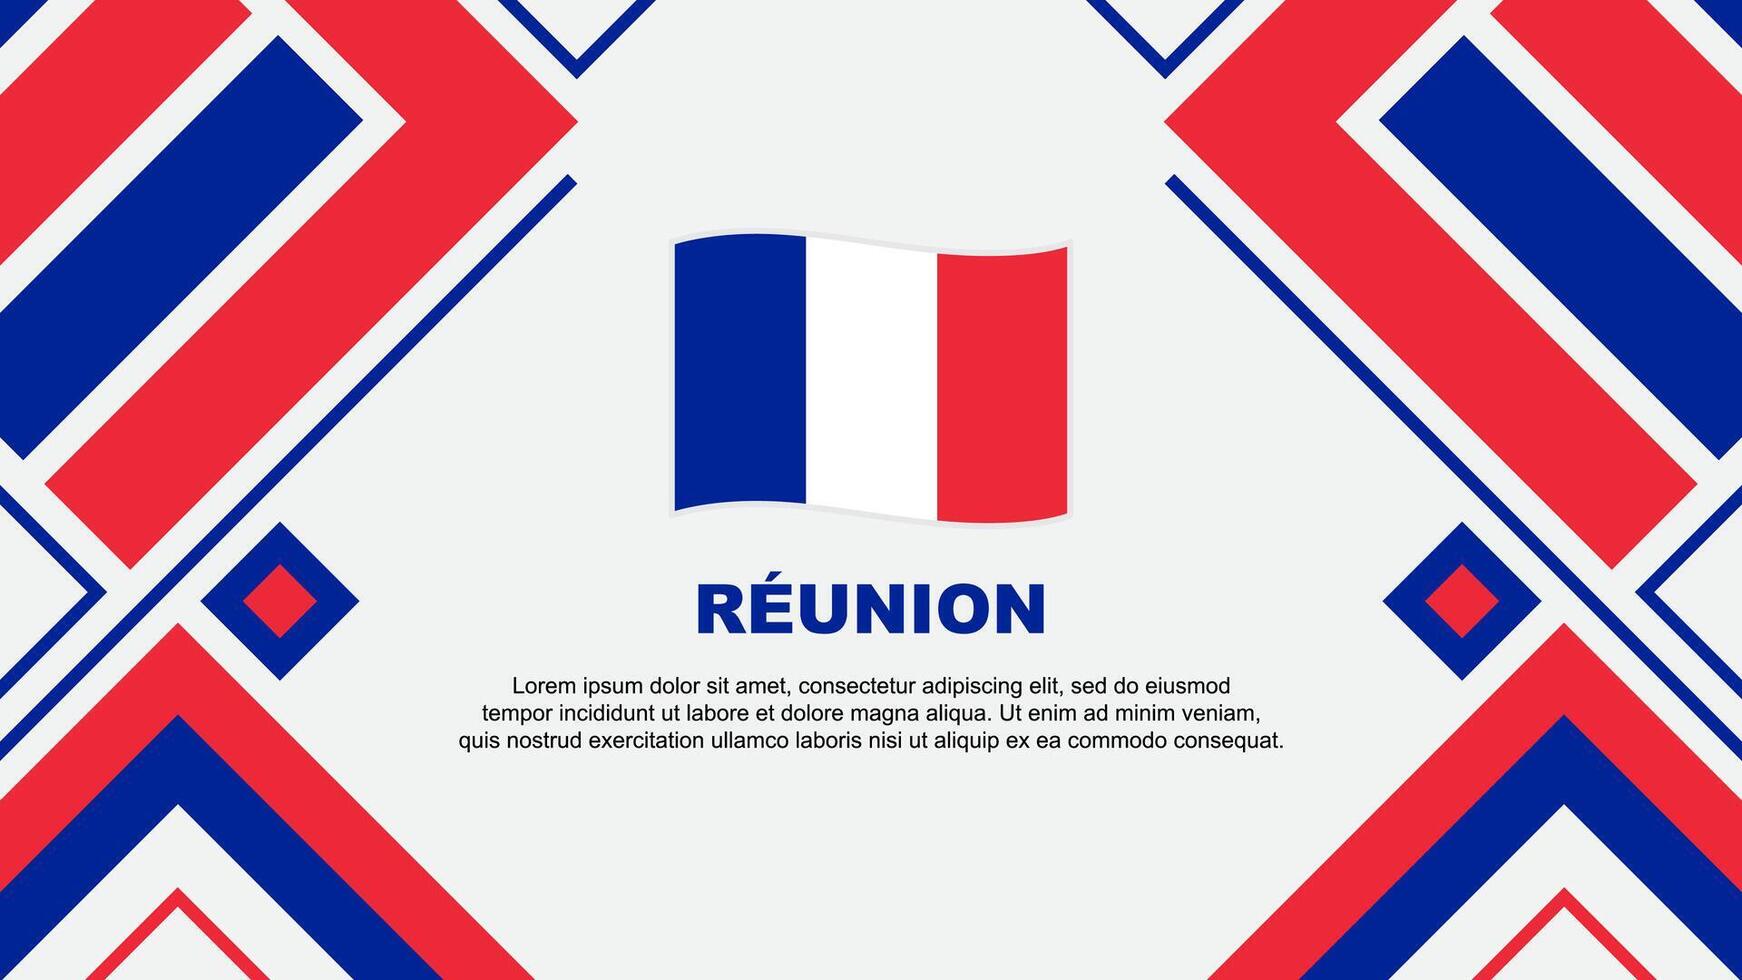 Reunion Flag Abstract Background Design Template. Reunion Independence Day Banner Wallpaper Vector Illustration. Reunion Flag